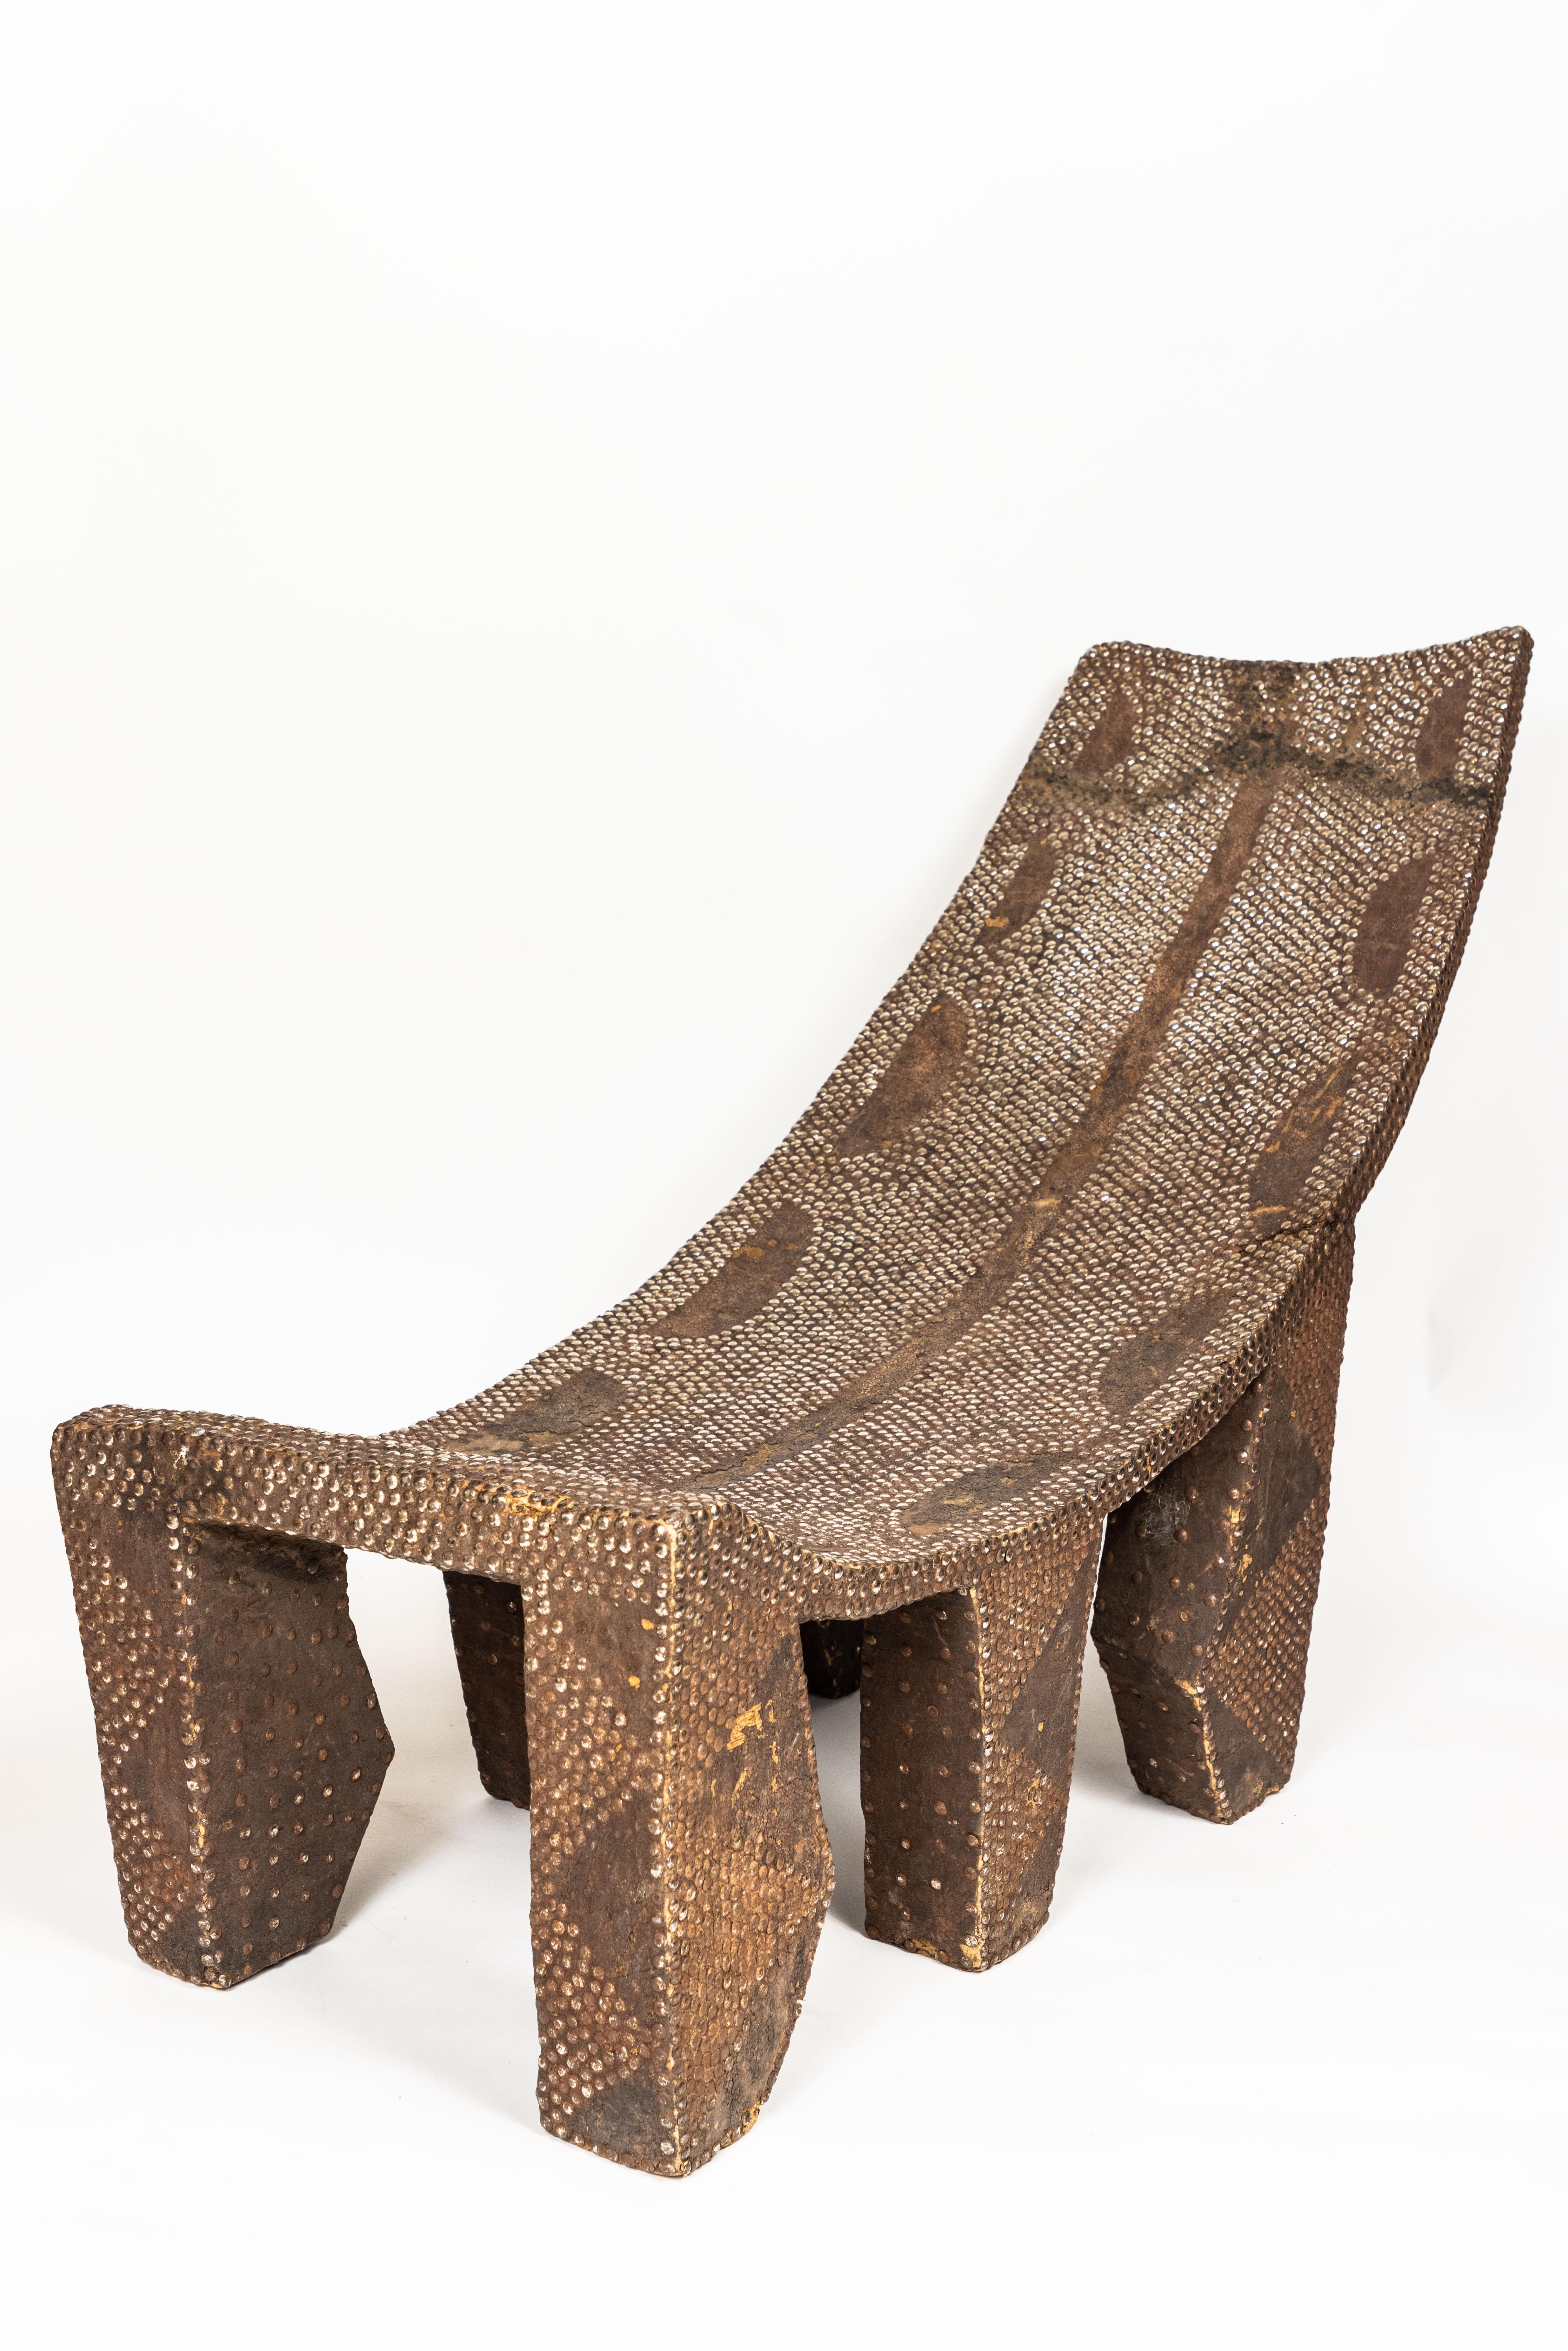 20th Century Vintage African Studded Wood Reclining Chair